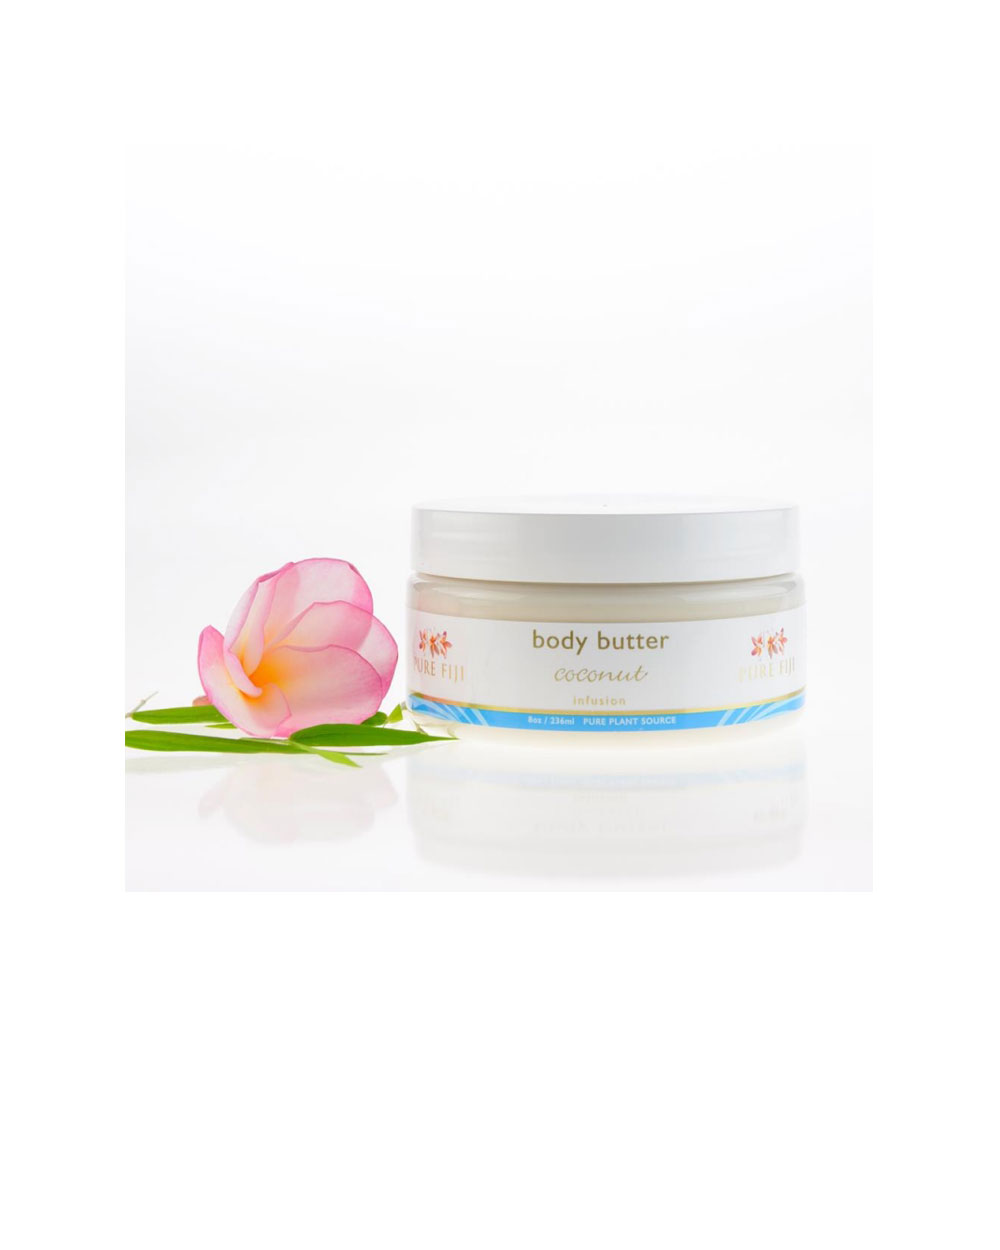 Pure-Fiji-Coconut-body-butter-from-About-face_$46